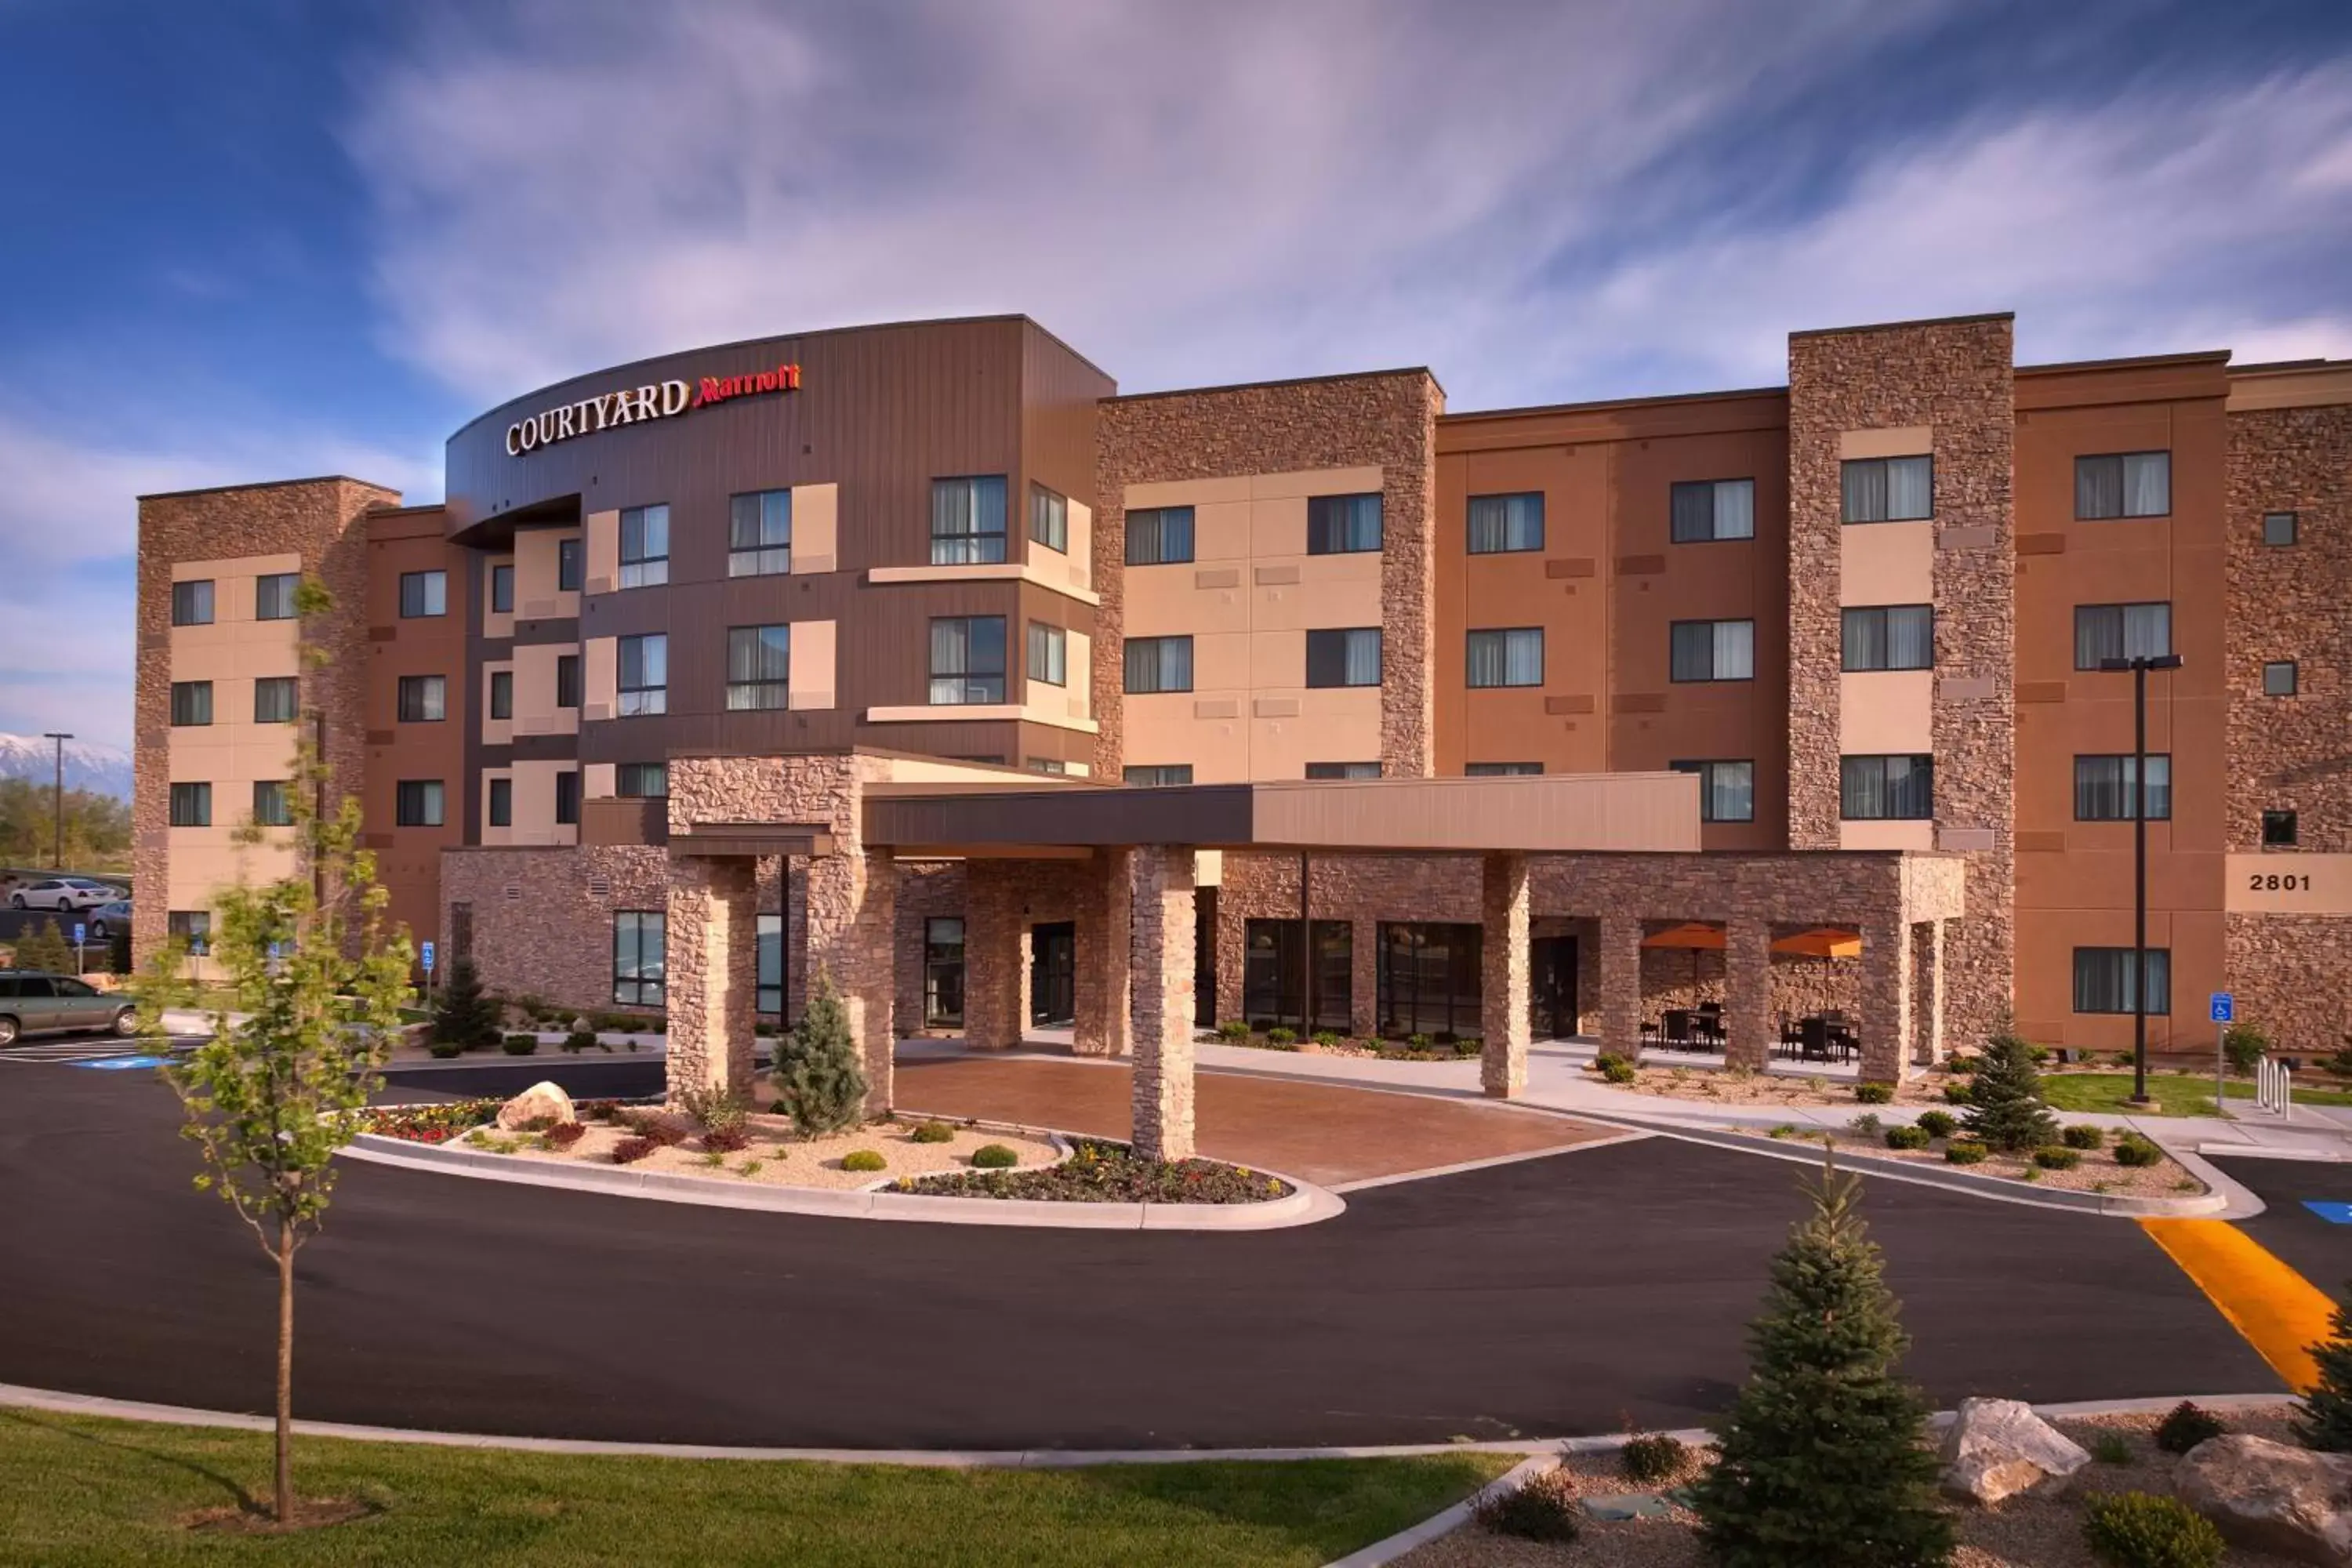 Property Building in Courtyard by Marriott Lehi at Thanksgiving Point